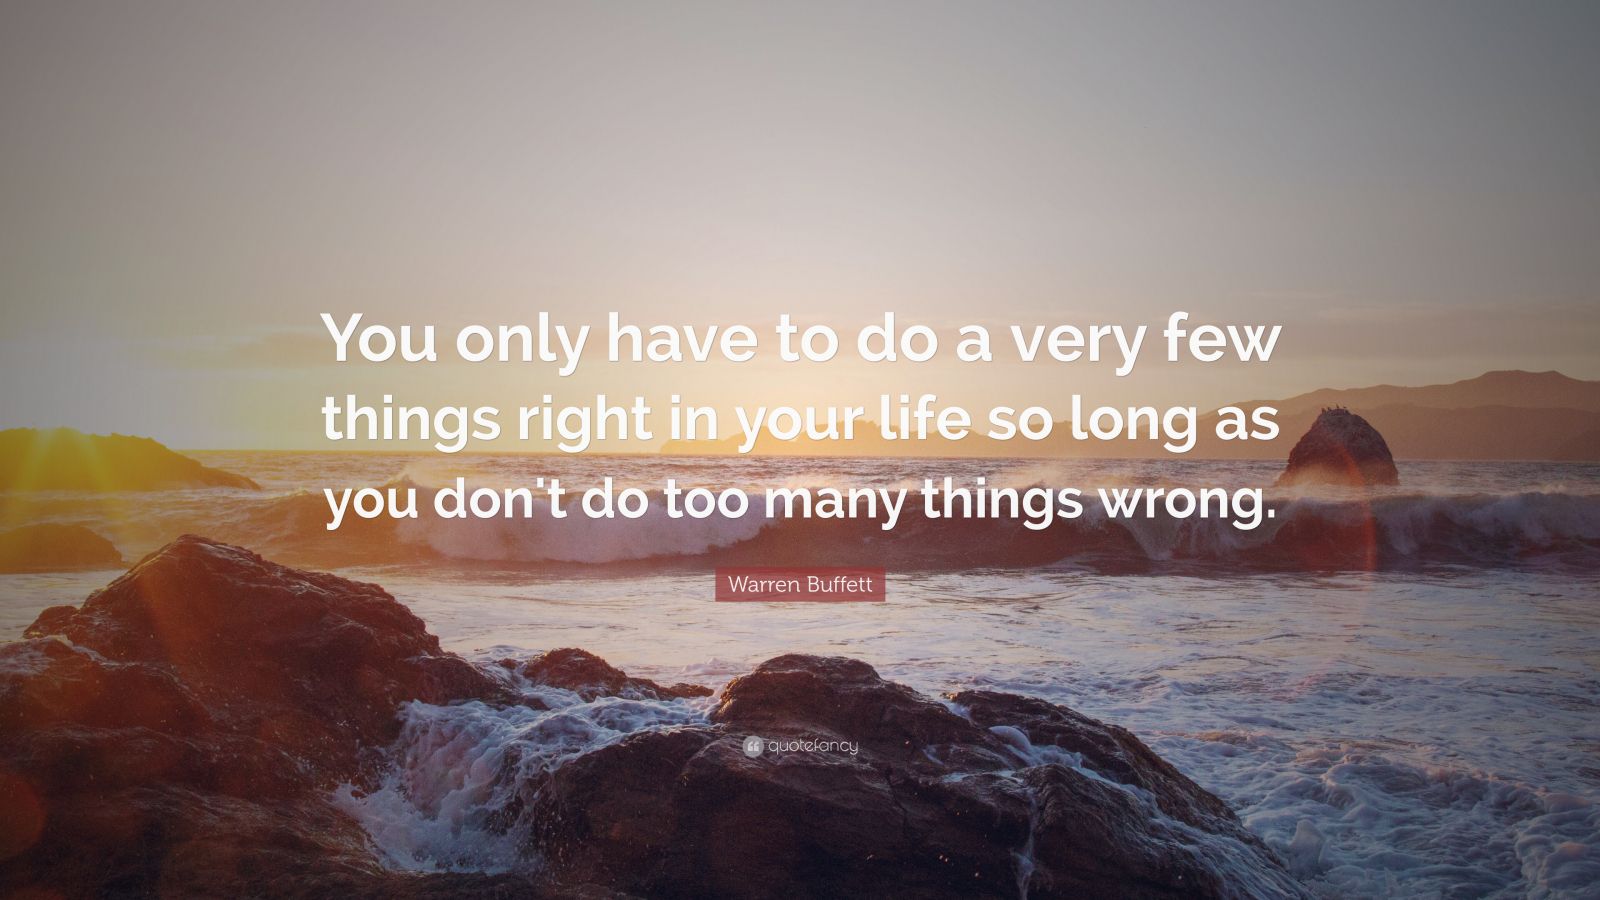 Warren Buffett Quote: “You only have to do a very few things right in ...